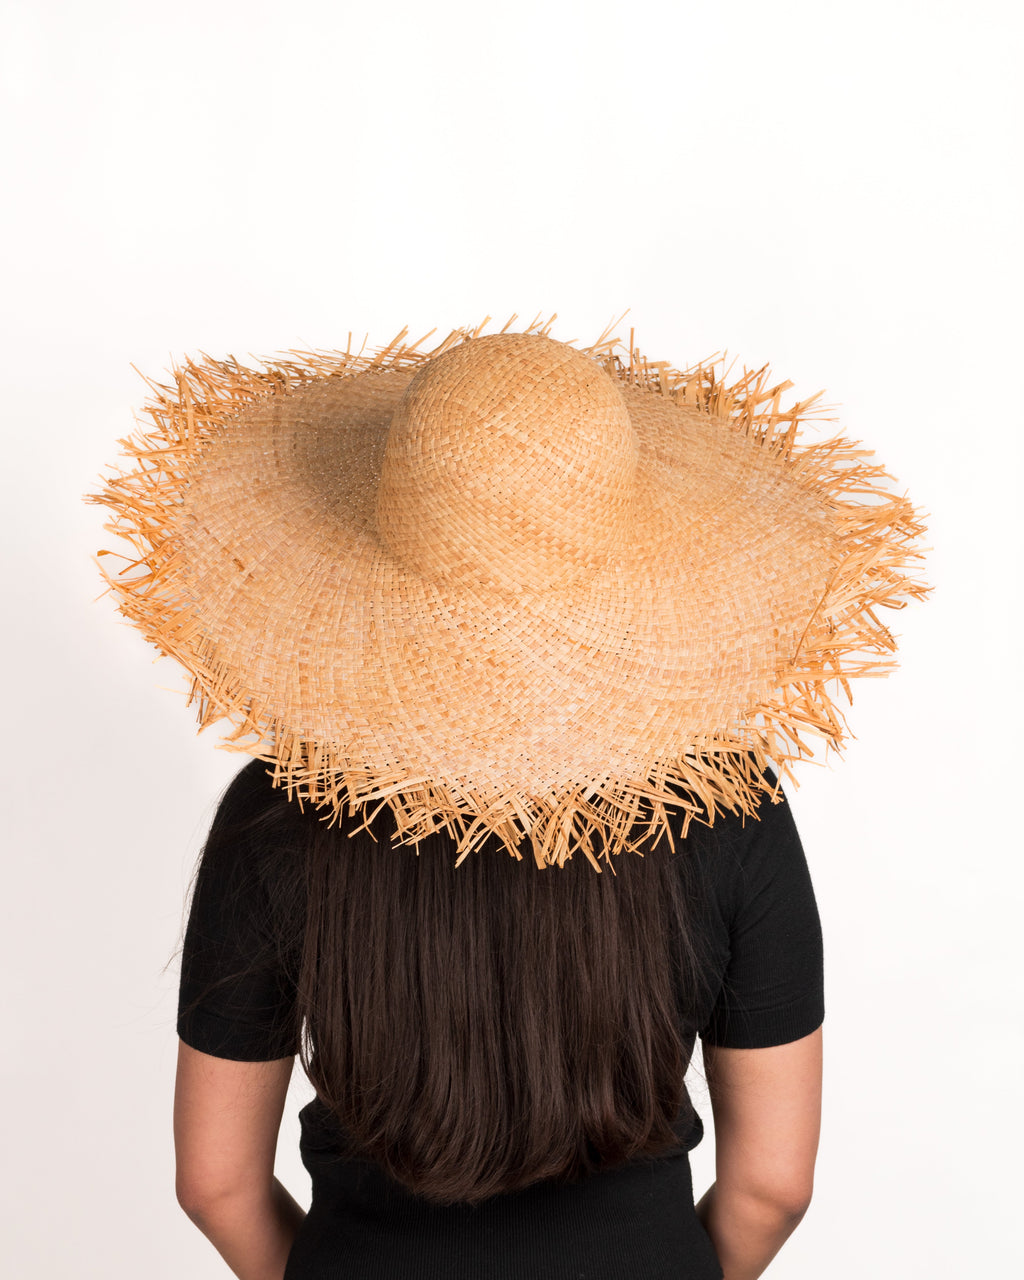 Shop Beach Hats Online - Fedora Hats for Women - Where to get sun caps for Goa holiday near me